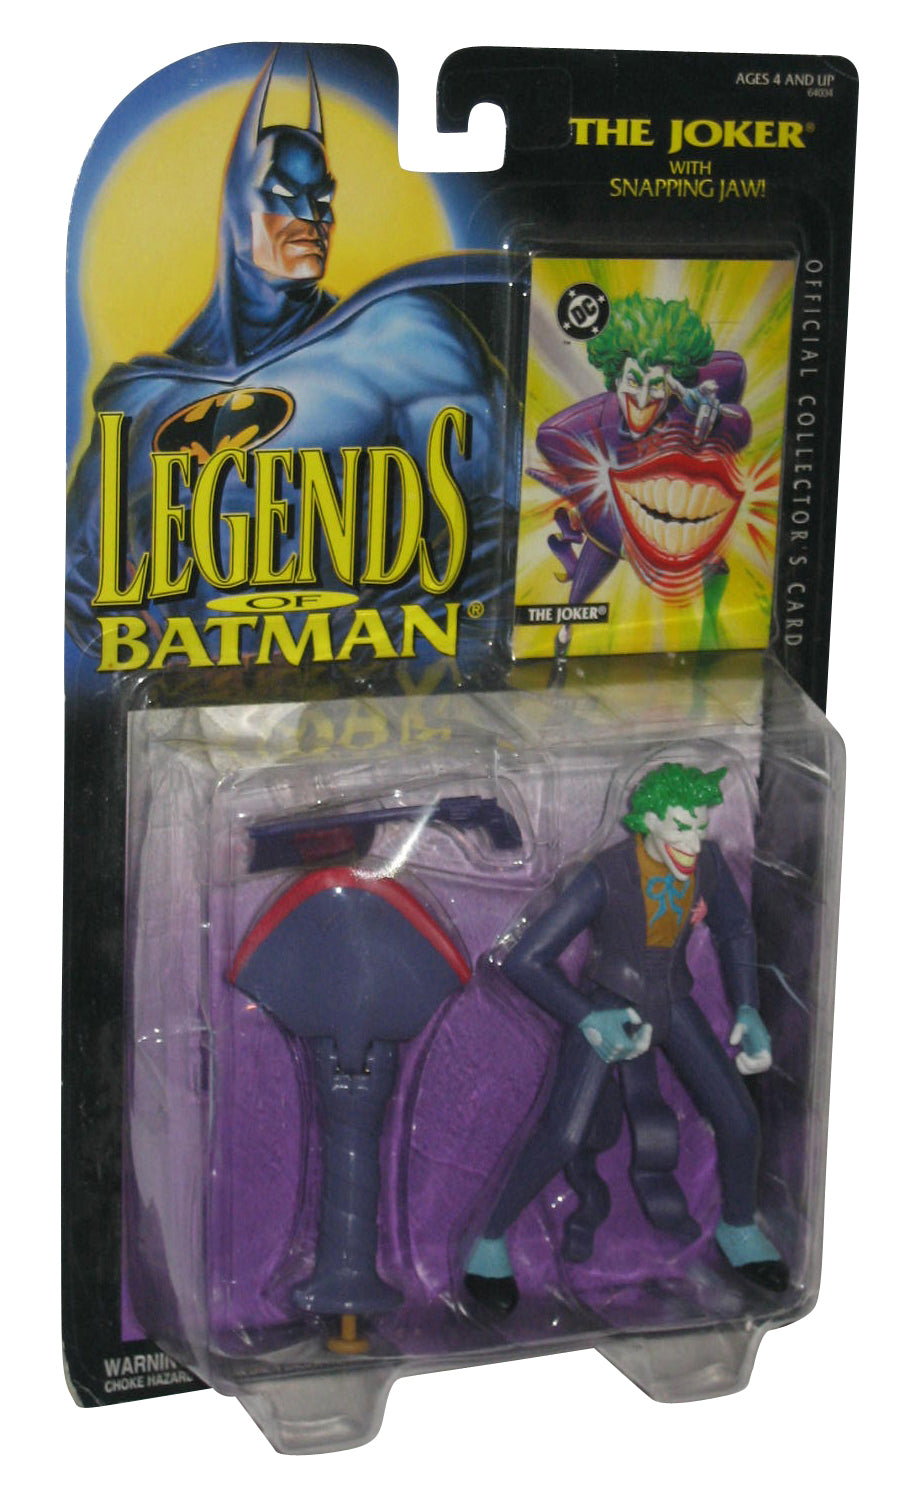 Legends of Batman : The Joker with Snapping Jaw